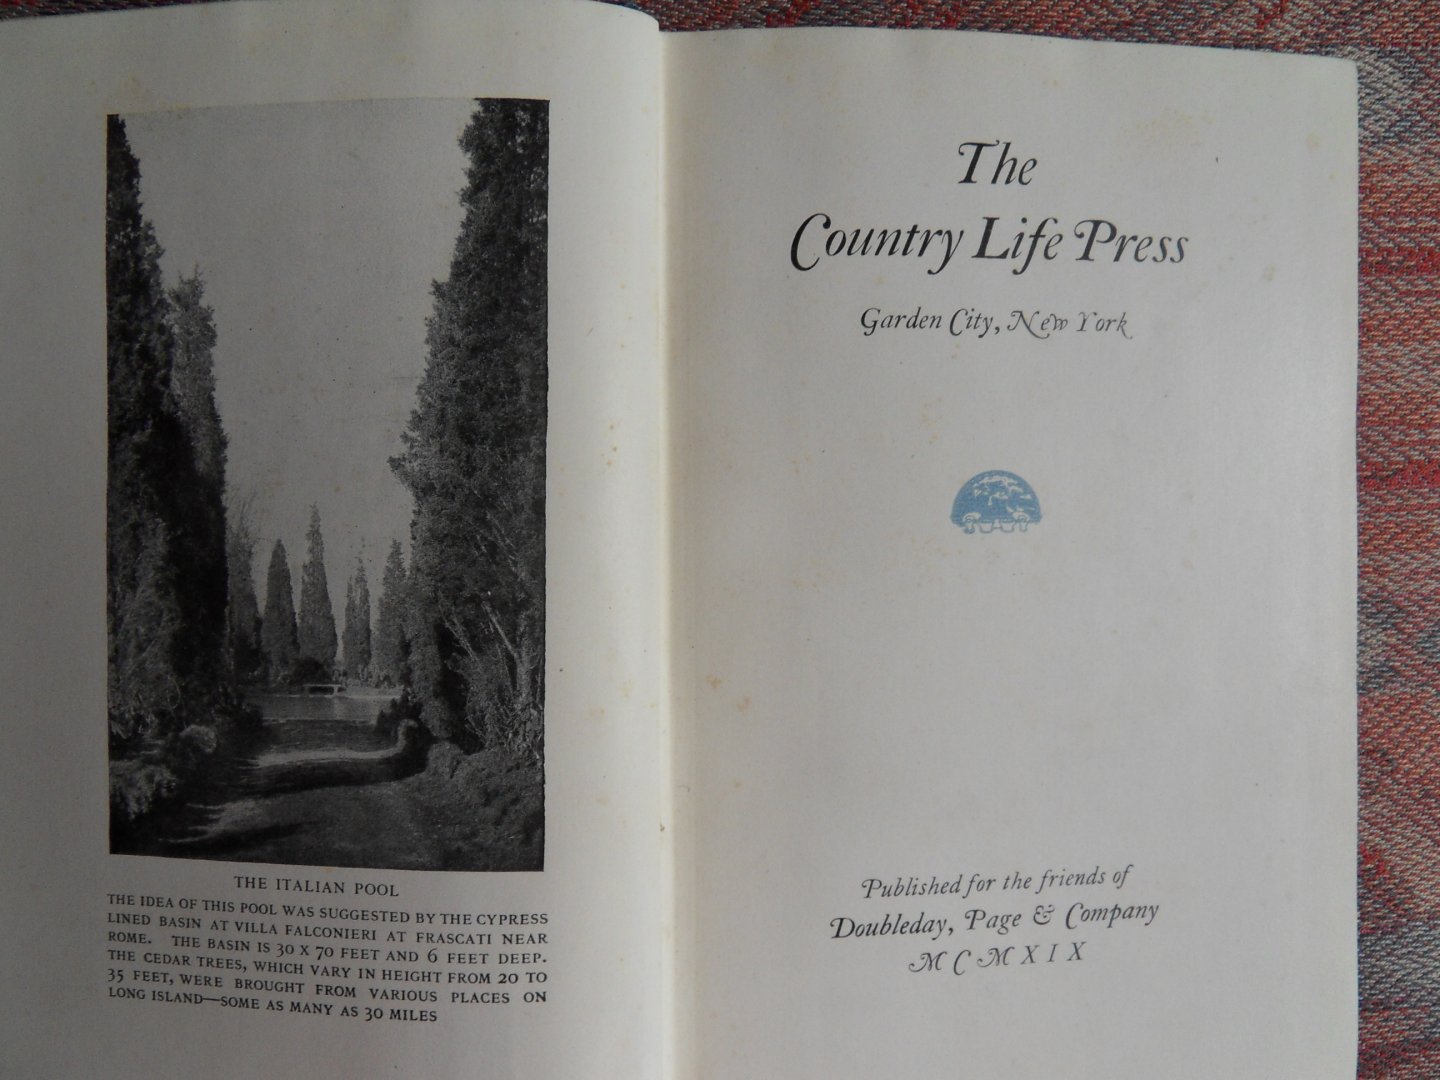 Doubleday, Page & Co. - The Country Life Press.